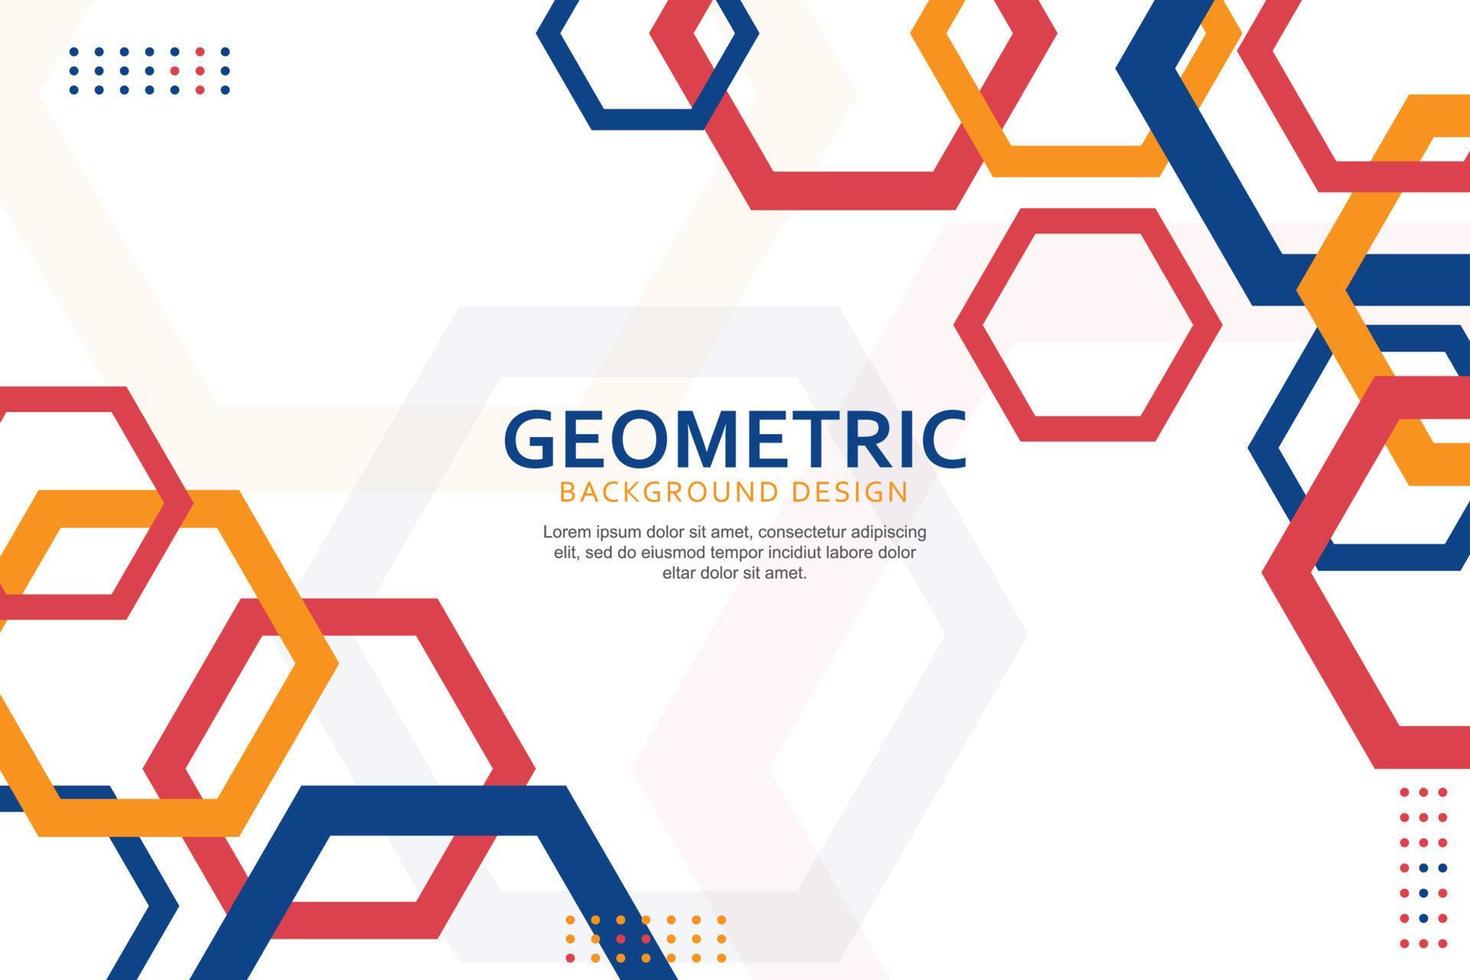 Abstract geometric background design with hexagonal shapes vector